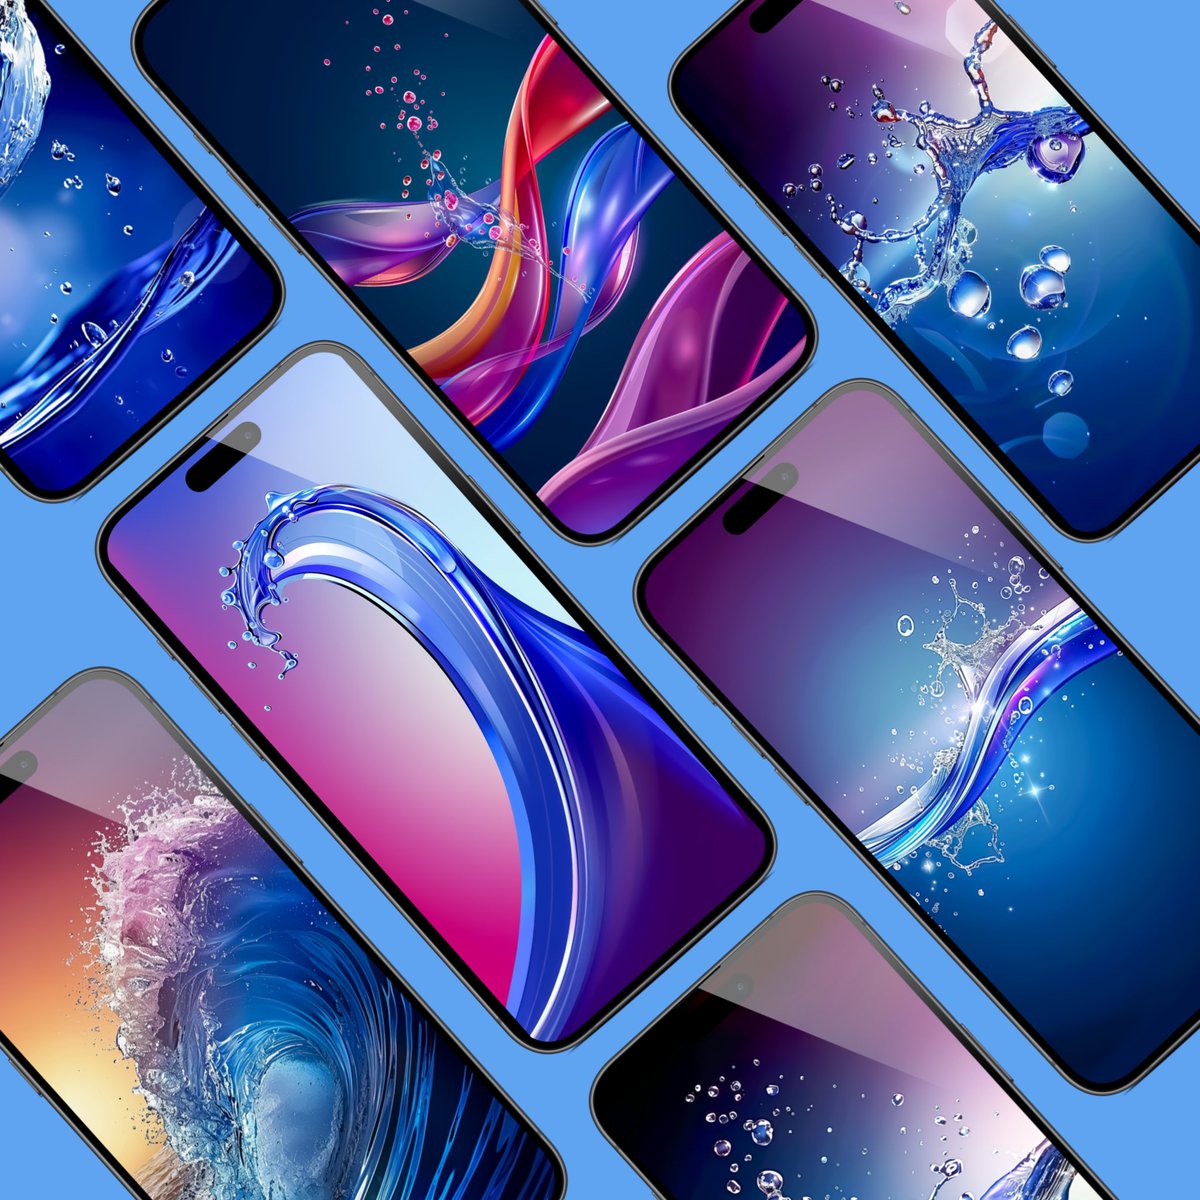 Transform your phone into a refreshing oasis with 'Splash of Fun,' a collection of 12 vibrant, high-resolution wallpapers designed to bring a touch of playful energy to your screen...a sample HD image and prompt are in the comments!📱✨ Discover my new wallpaper pack on my